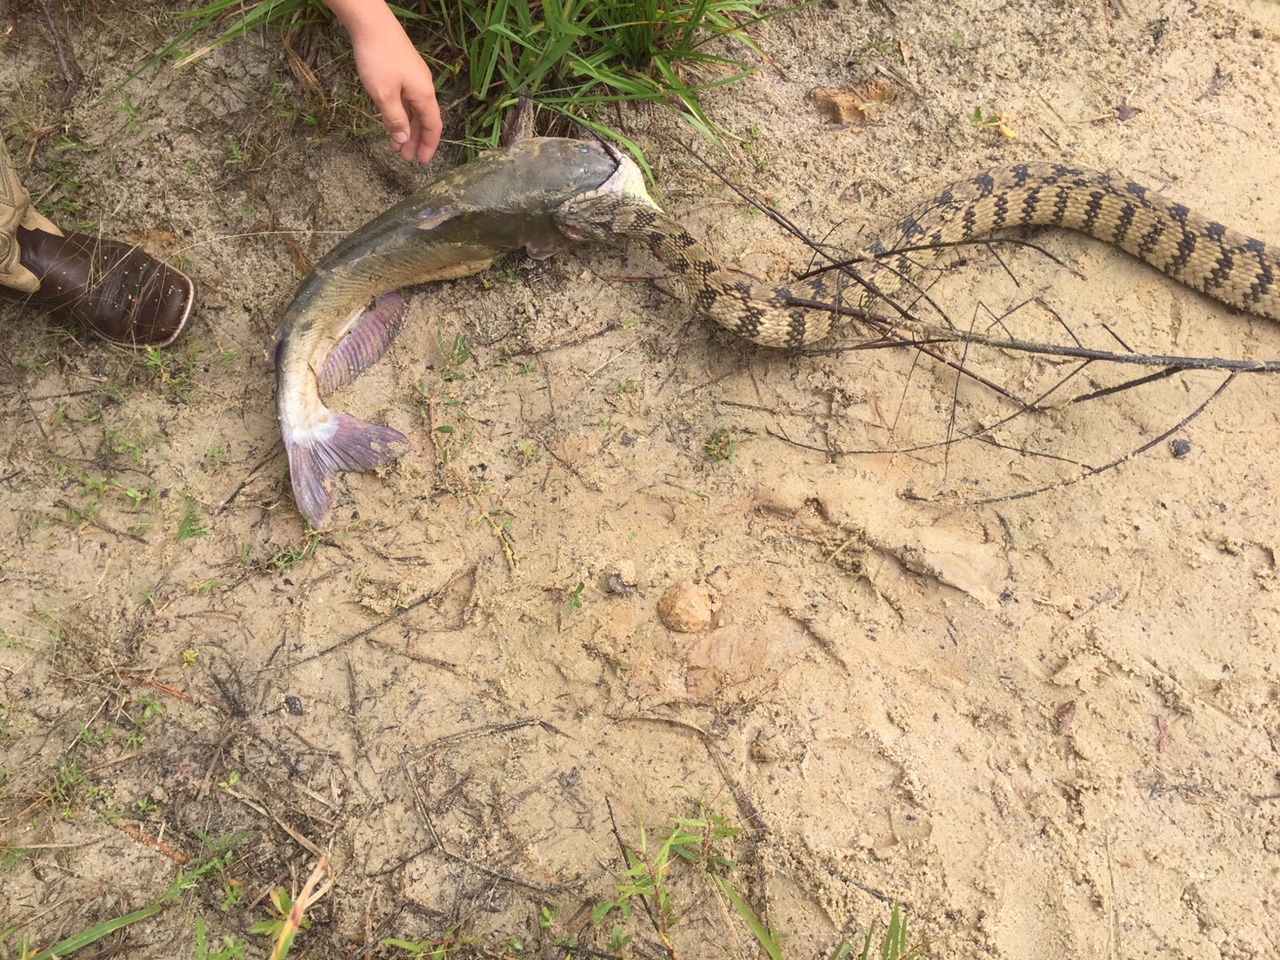 Texas boy reels in catfish with snake latched onto its head - Houston Chronicle1280 x 960